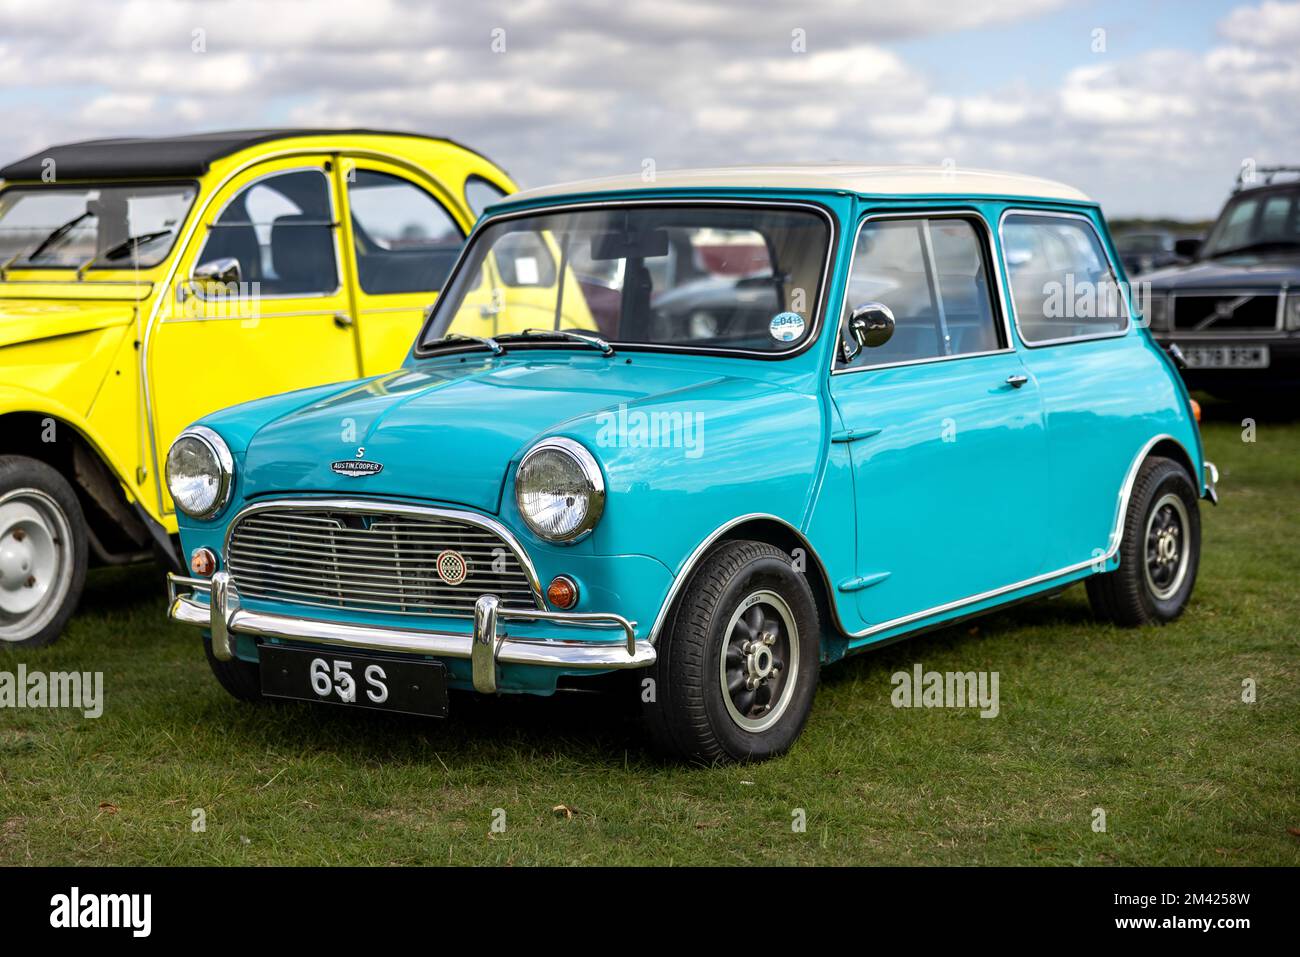 1965 Austin Mini Cooper S ‘65 S’ on display at the October Scramble held at the Bicester Heritage Centre on the 9th October 2022. Stock Photo